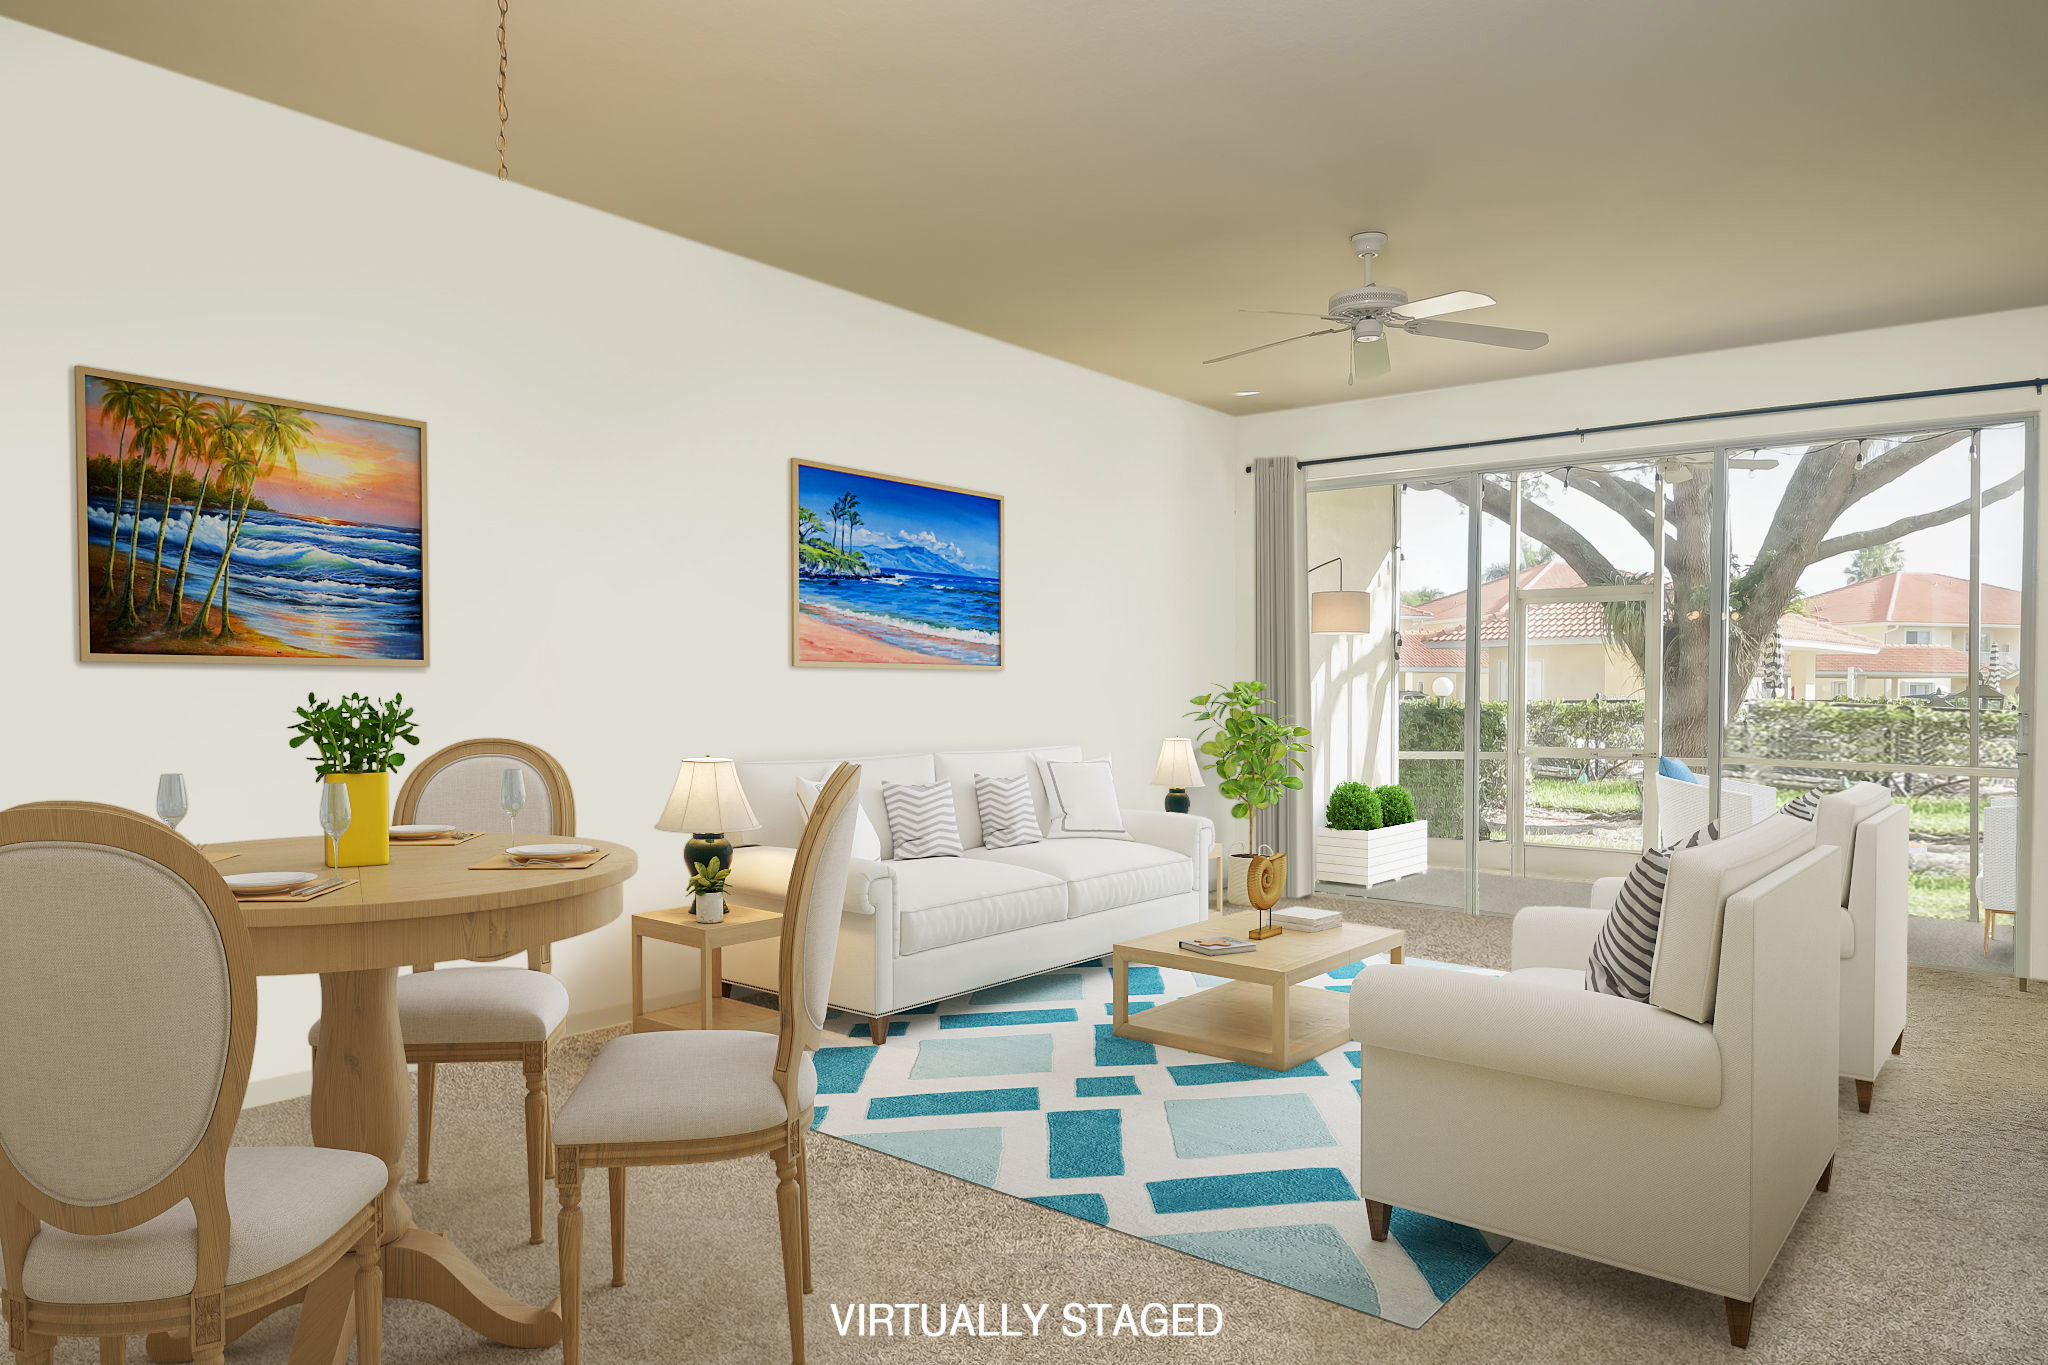 Virtually staged to show lighter furniture